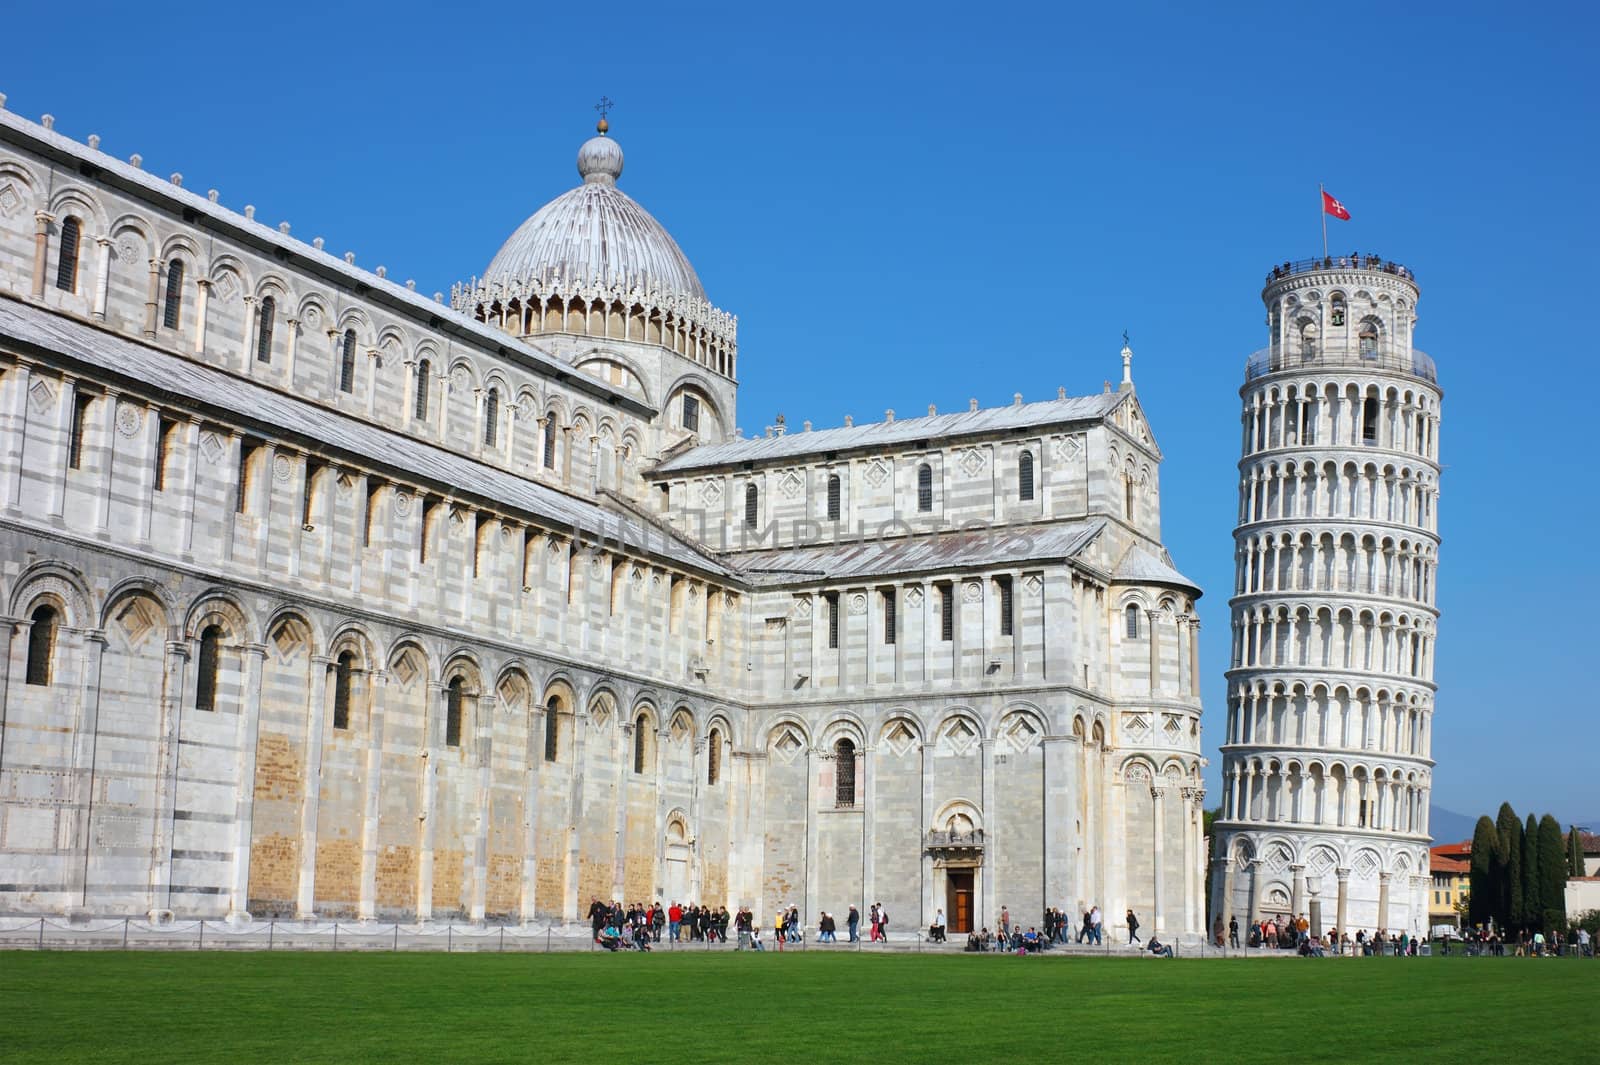 Famous Leaning Tower in Pisa on piazza dei Miracoli in Pisa, Italy. Shot in a bright sunny day.